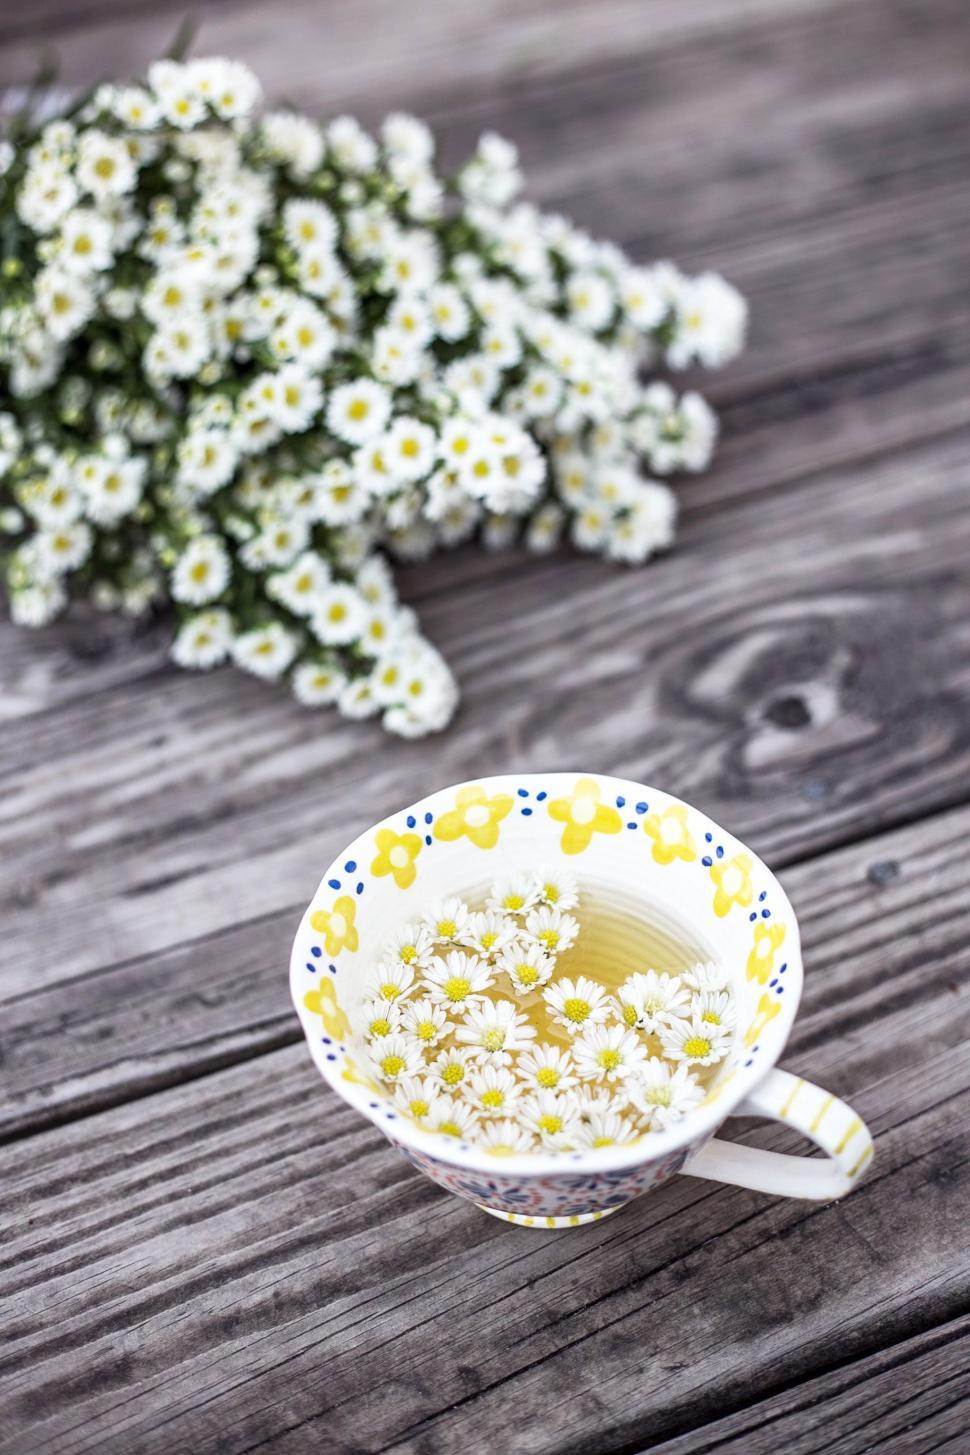 Free Image of Small Yellow and White Bowl Filled With Flowers 